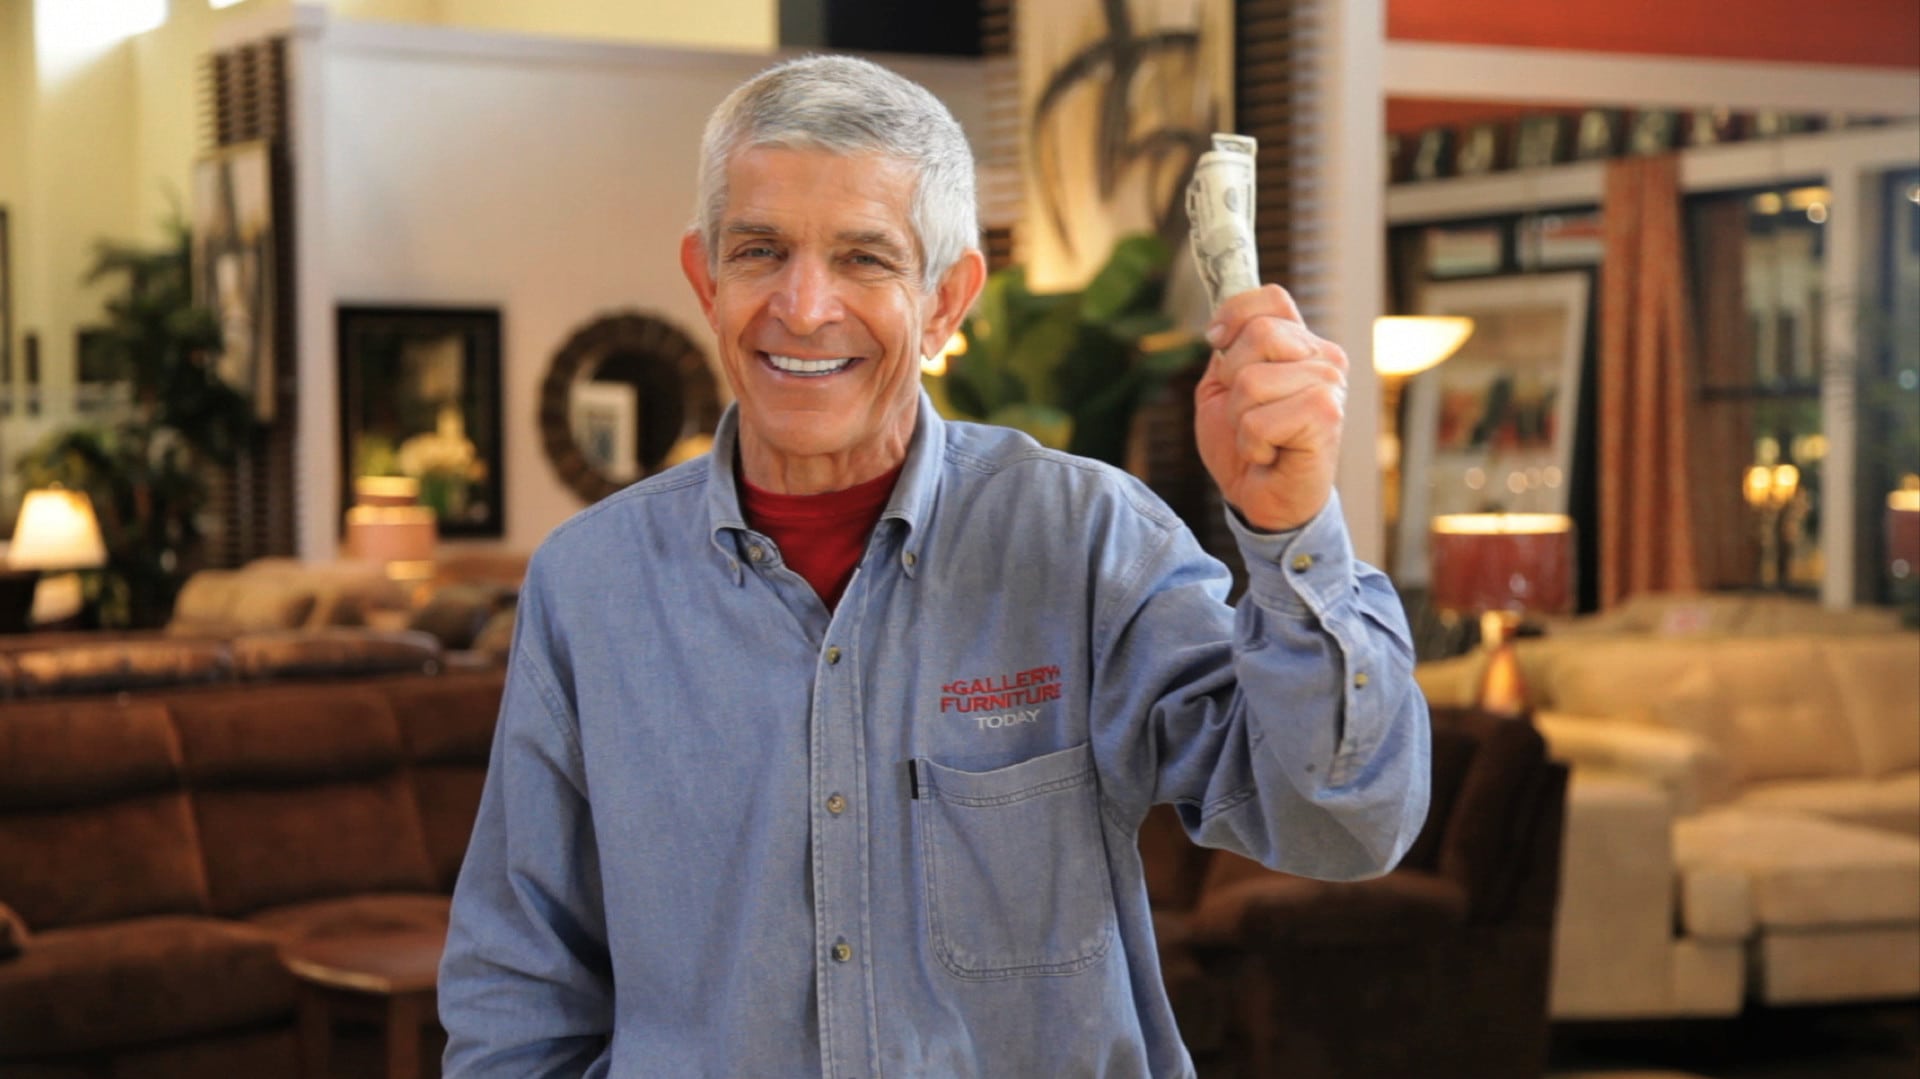 Mattress Mack: Multi-Millionaire Entrepreneur Warms Hearts and Hundreds of  Texans in the Snowpocalypse - Capitalism